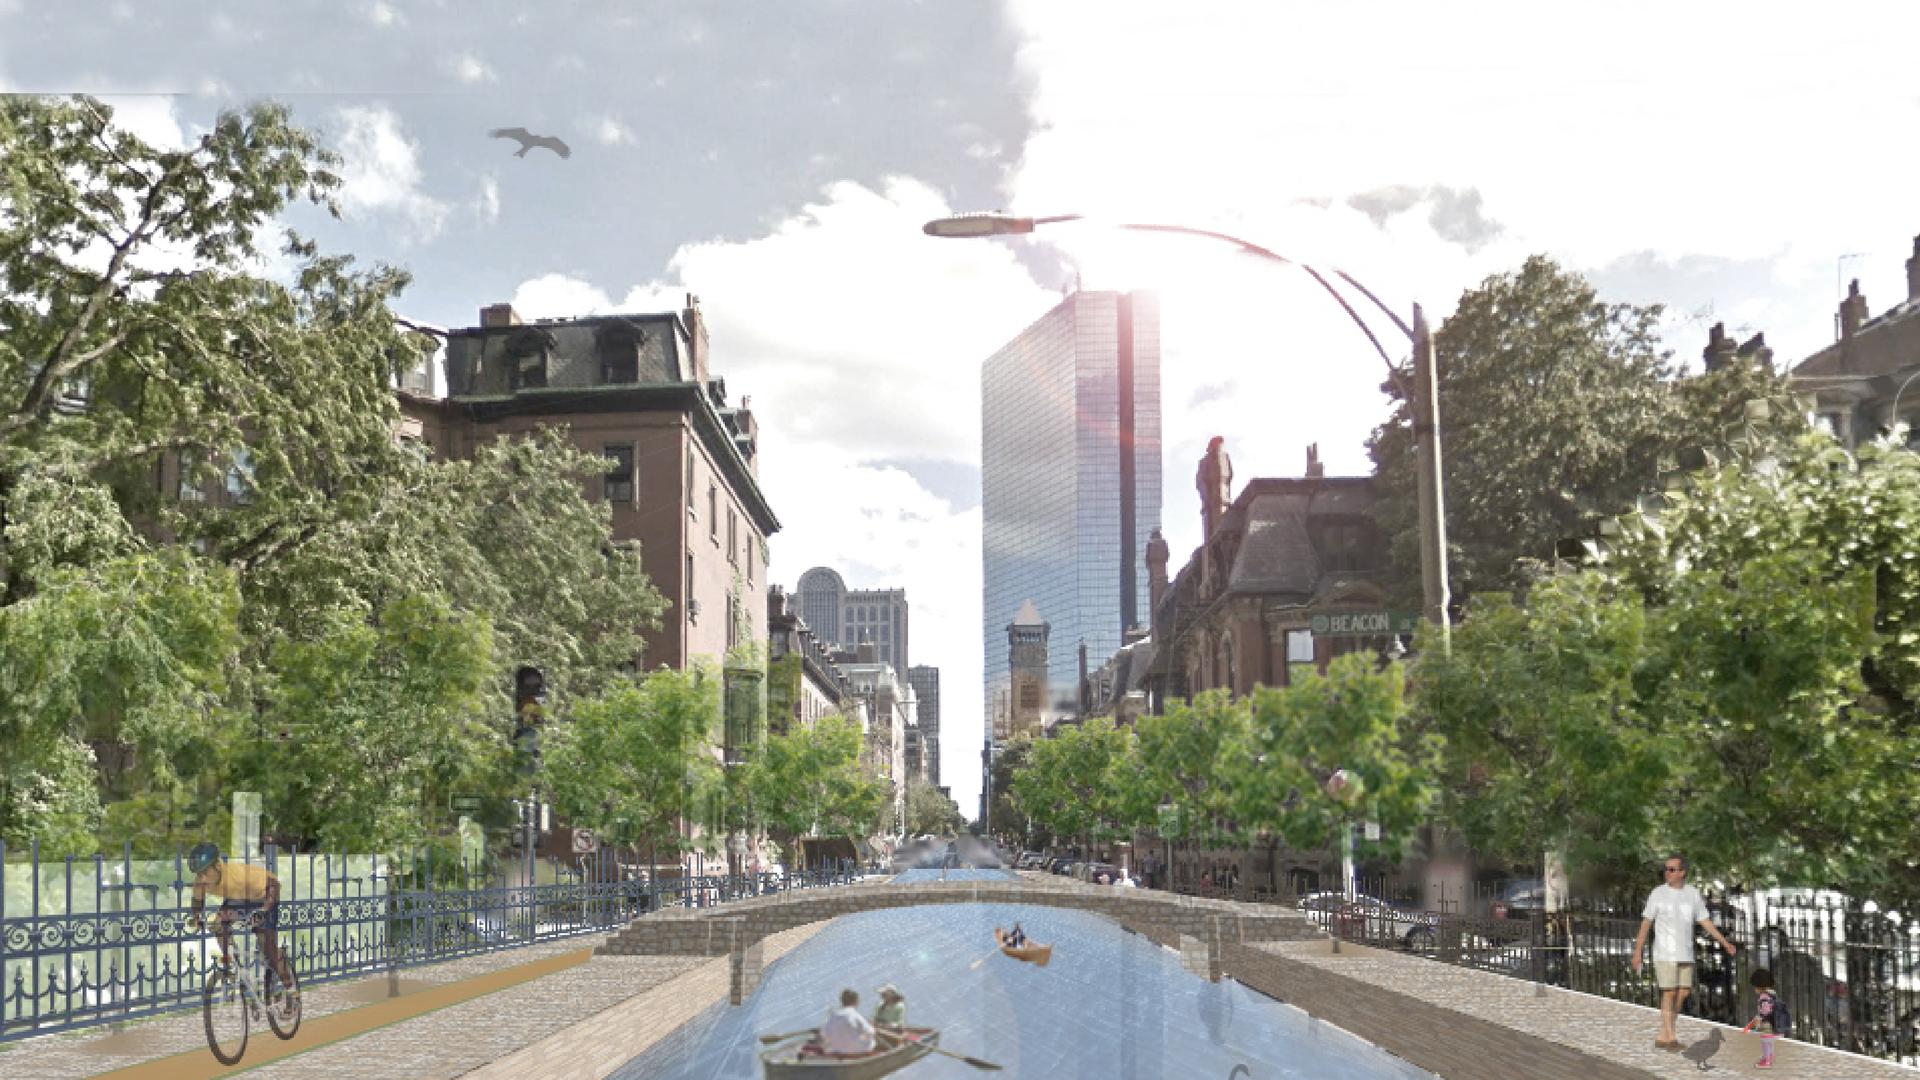 This artistic rendering of a canal system in the Back Bay neighborhood of Boston has people talking about climate change.